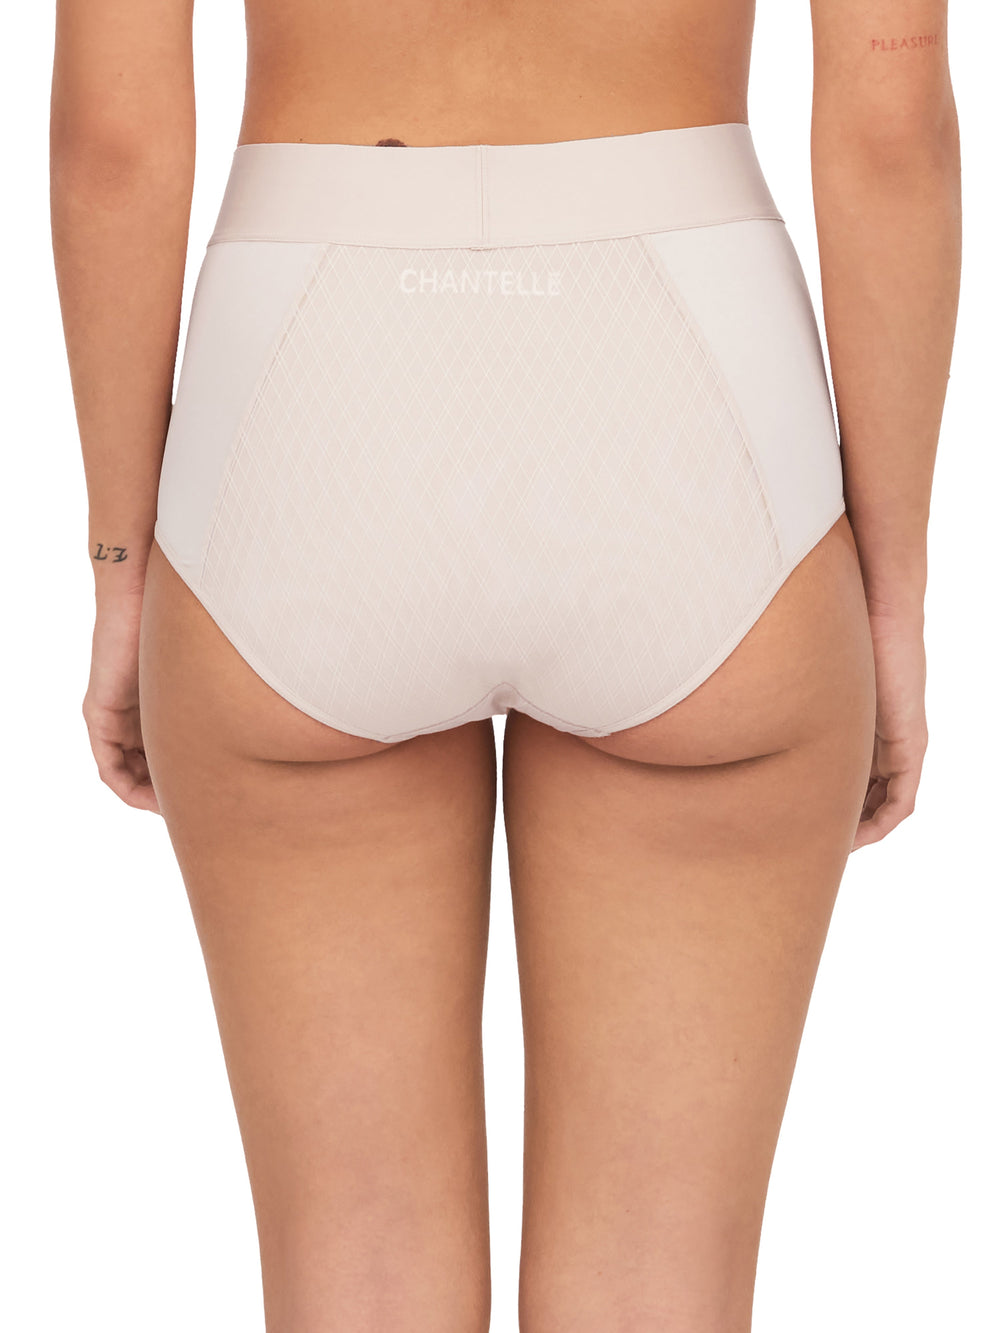 Chantelle Smooth Lines Support High Waisted Brief - Pearl Full Brief Chantelle 